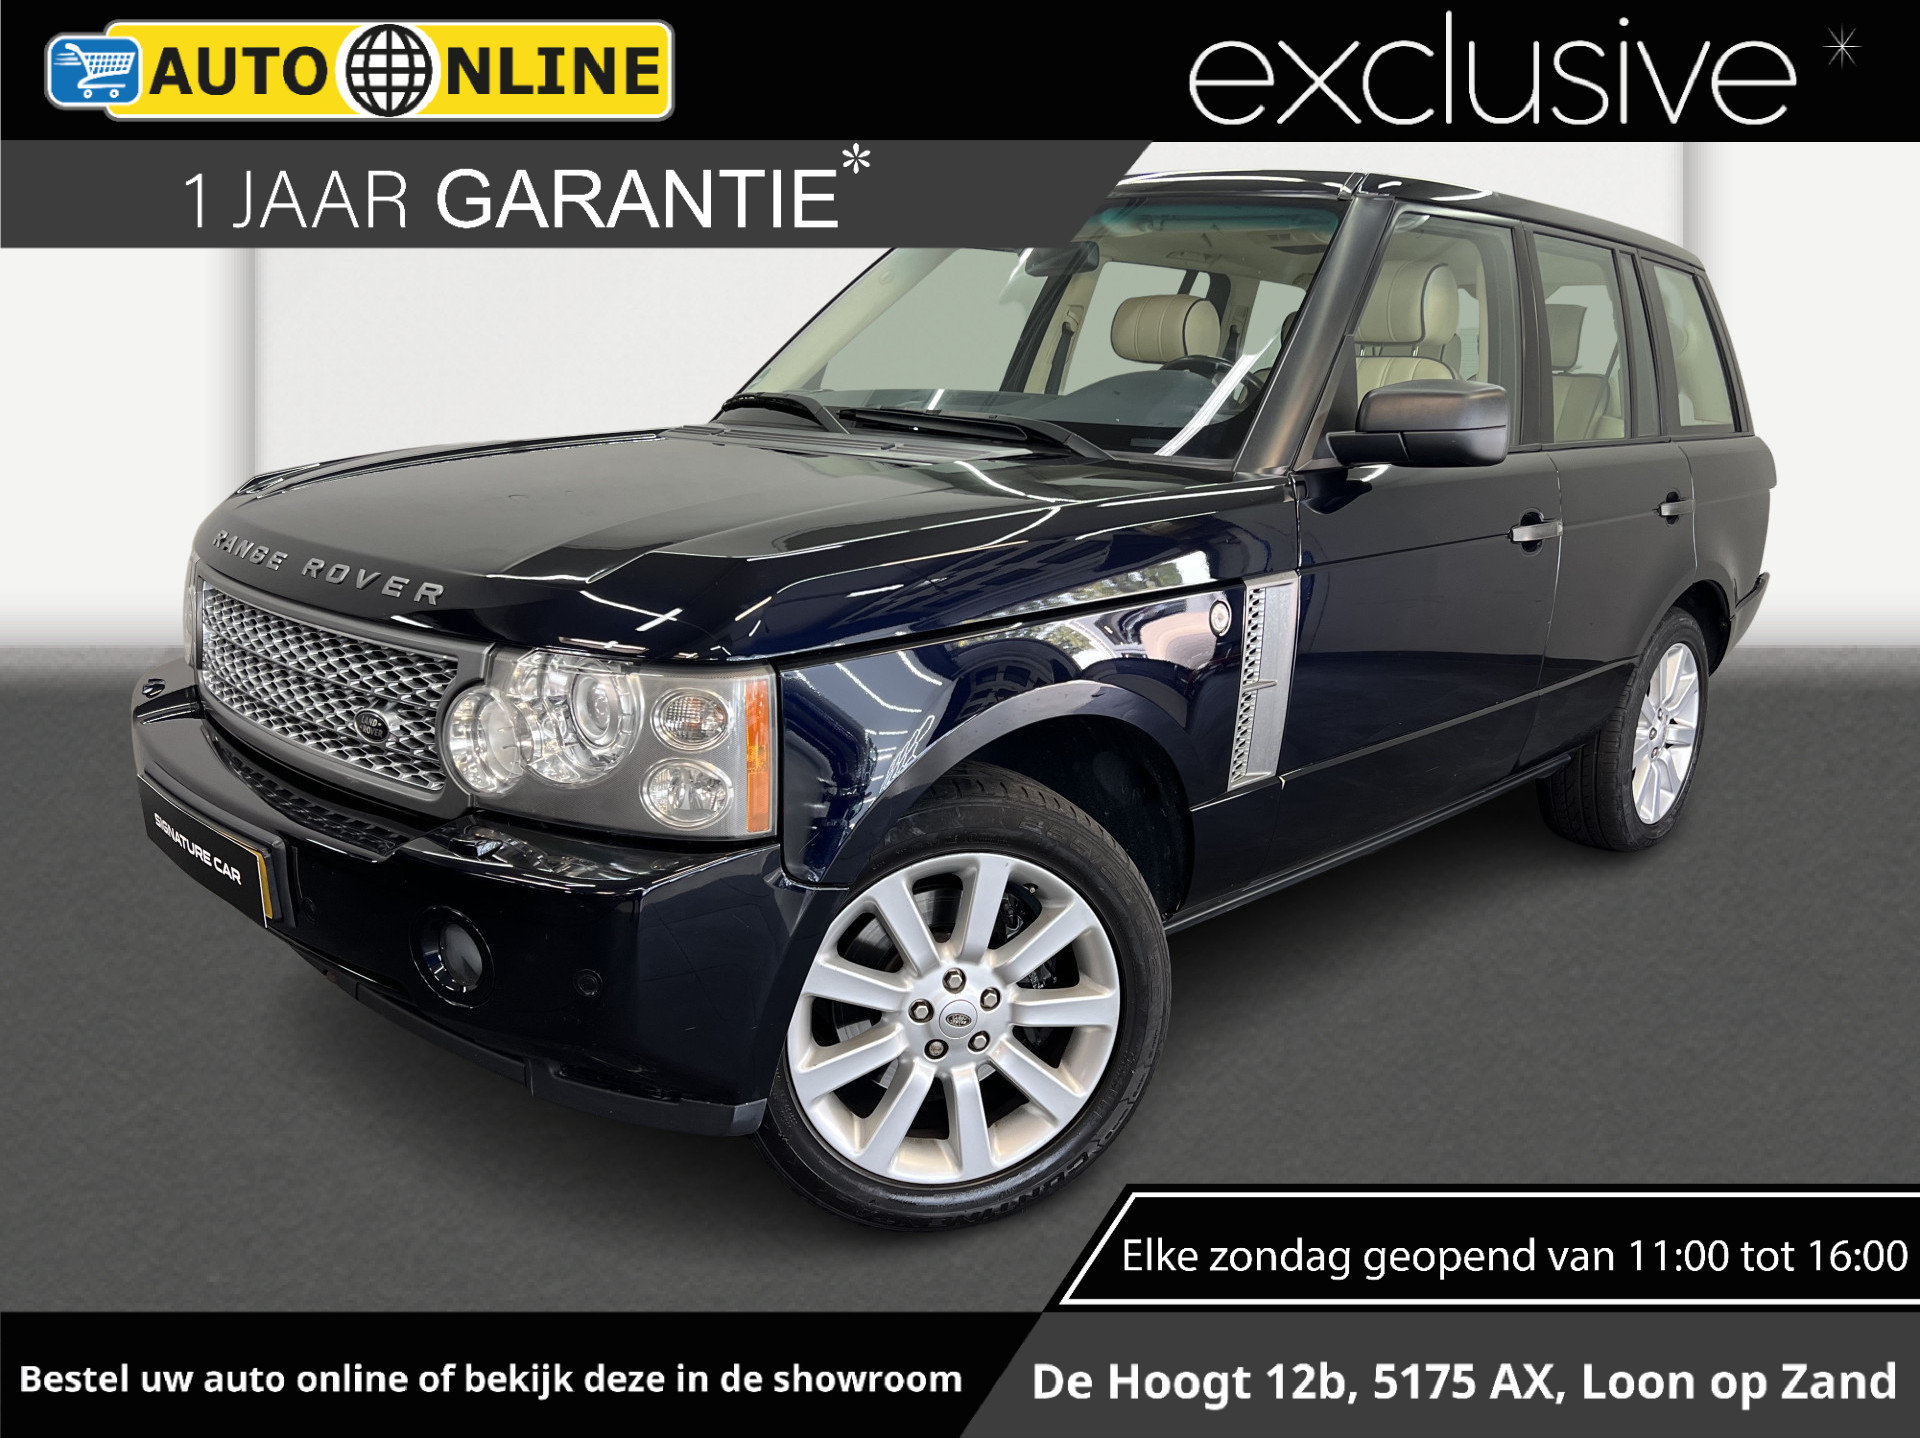 Land Rover Range Rover 4.2 V8 Supercharged ✅UNIEKE STAAT✅Airco✅Cruise controle✅Navigatie✅5 deurs✅TREKHAAK